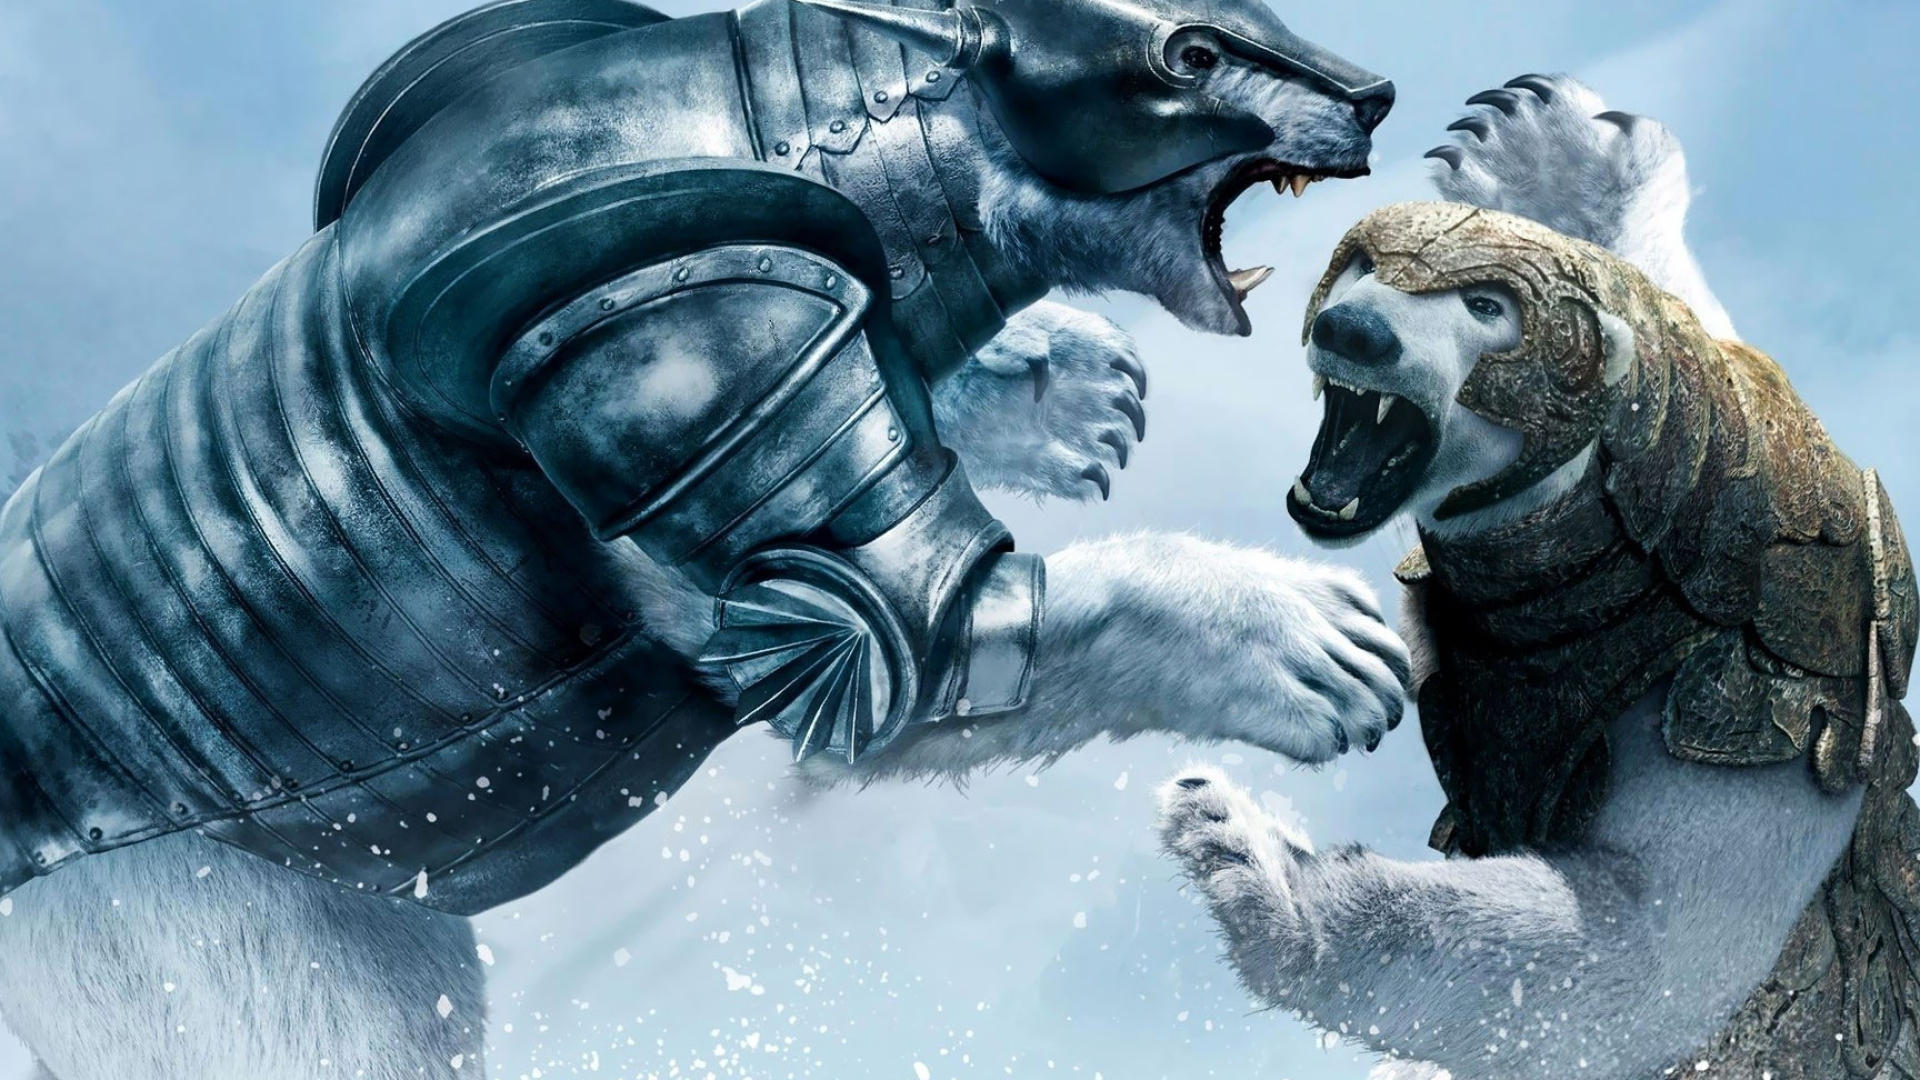 The Golden Compass, Movie wallpaper, Epic fantasy, Action-packed, 1920x1080 Full HD Desktop